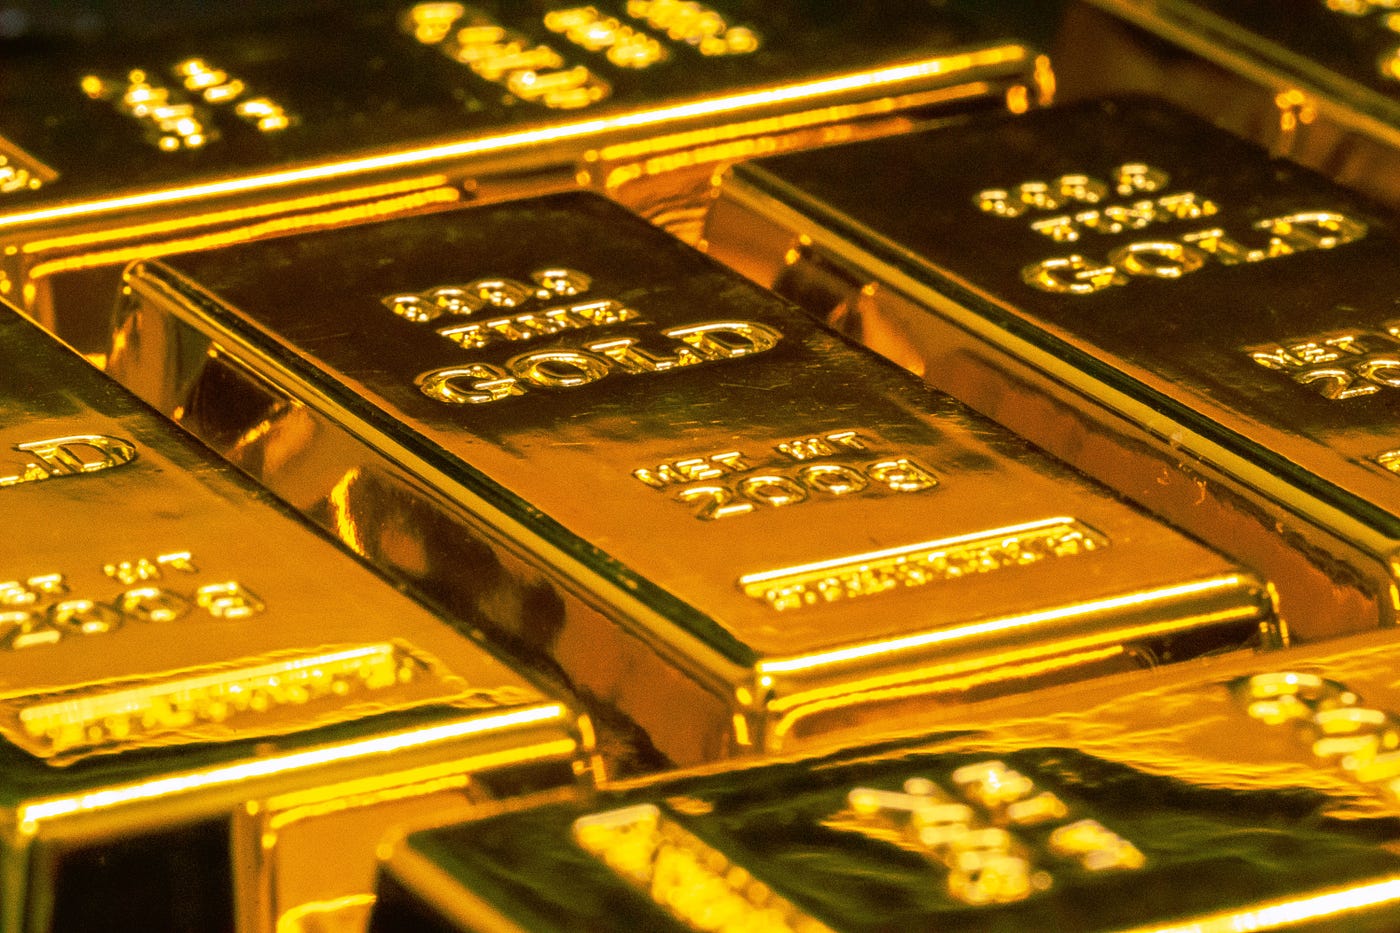 Costco now sells gold bars. Are they a good investment?